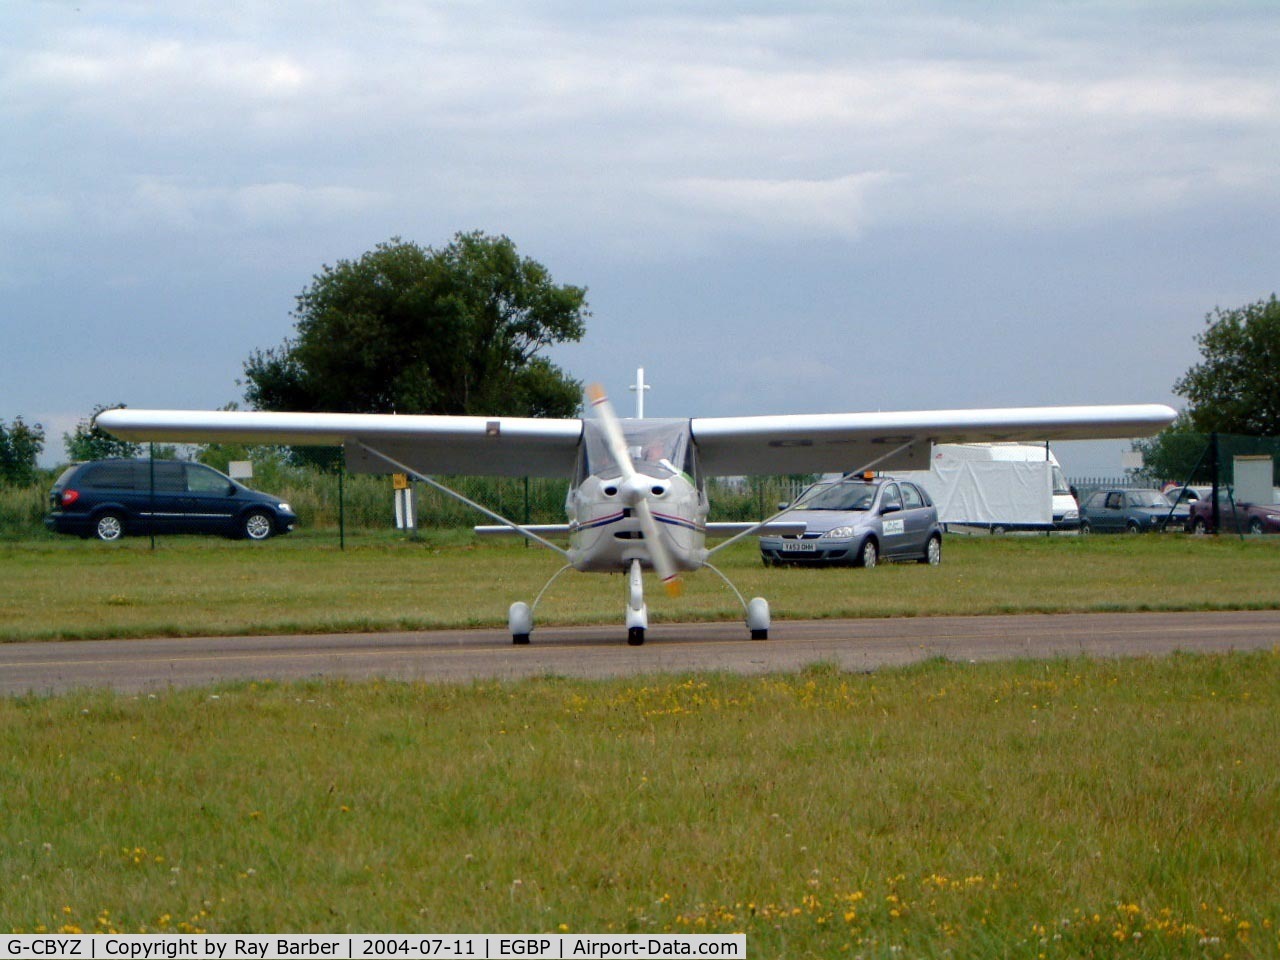 G-CBYZ, 2003 Tecnam P-92EA Echo Super C/N PFA 318A-13984, Tecnam P.92-EA Echo [PFA 318A-13984] Kemble~G 11/07/2004. Seen at the PFA Fly in 2004 Kemble UK. Reminds me of a face looking nose on with the prop spinner as the nose. 